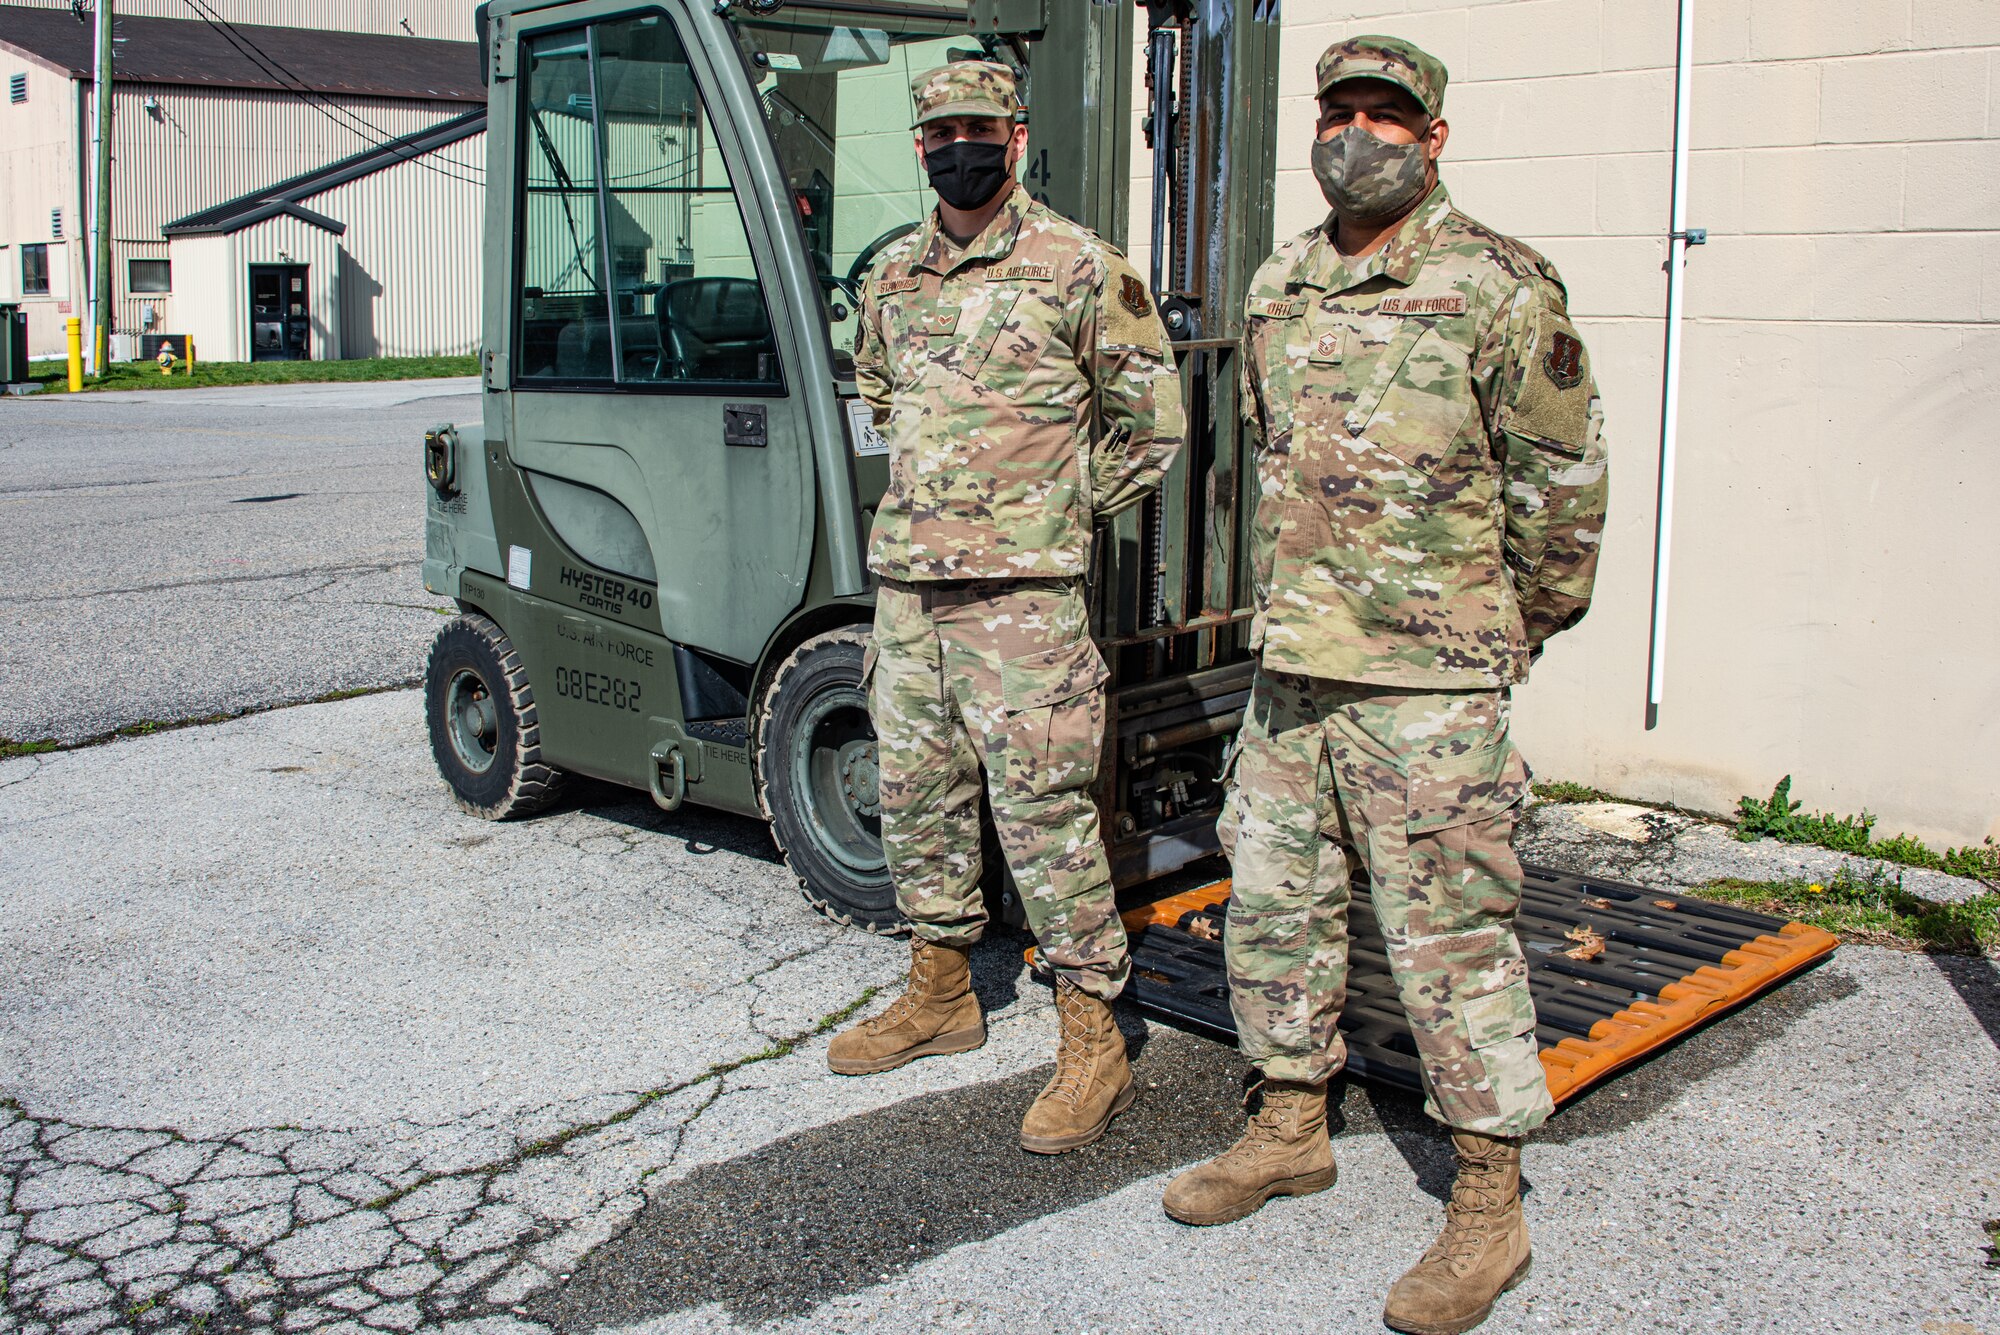 SrA Eric Steinbeiser and MSgt Nephtali Ortiz, members of the 166th Logistical Readiness Squadron’s ground transportation section